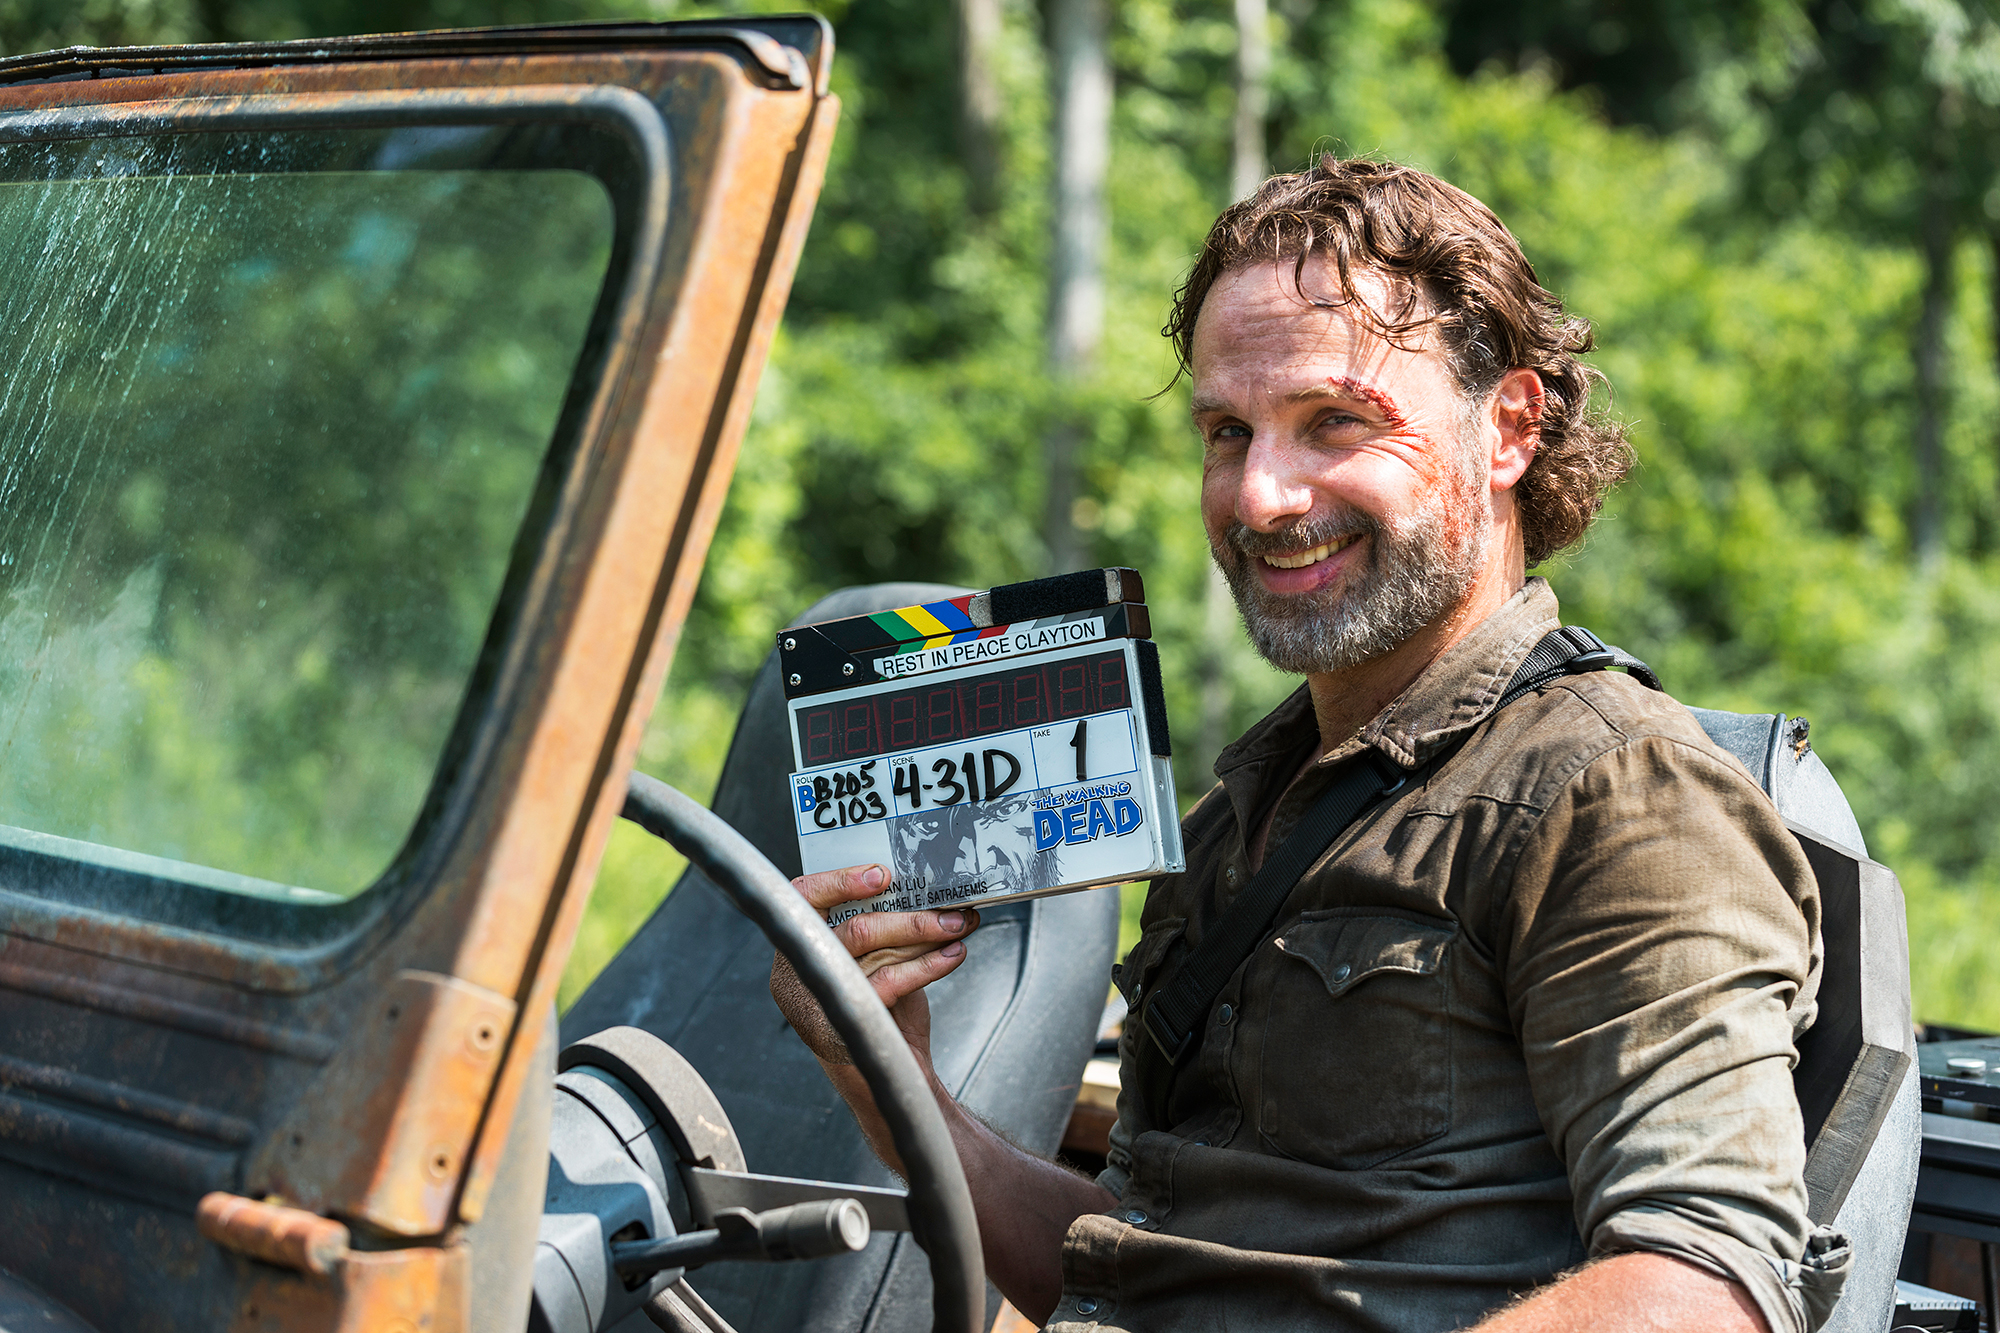 rick the walking dead smiling on a couch